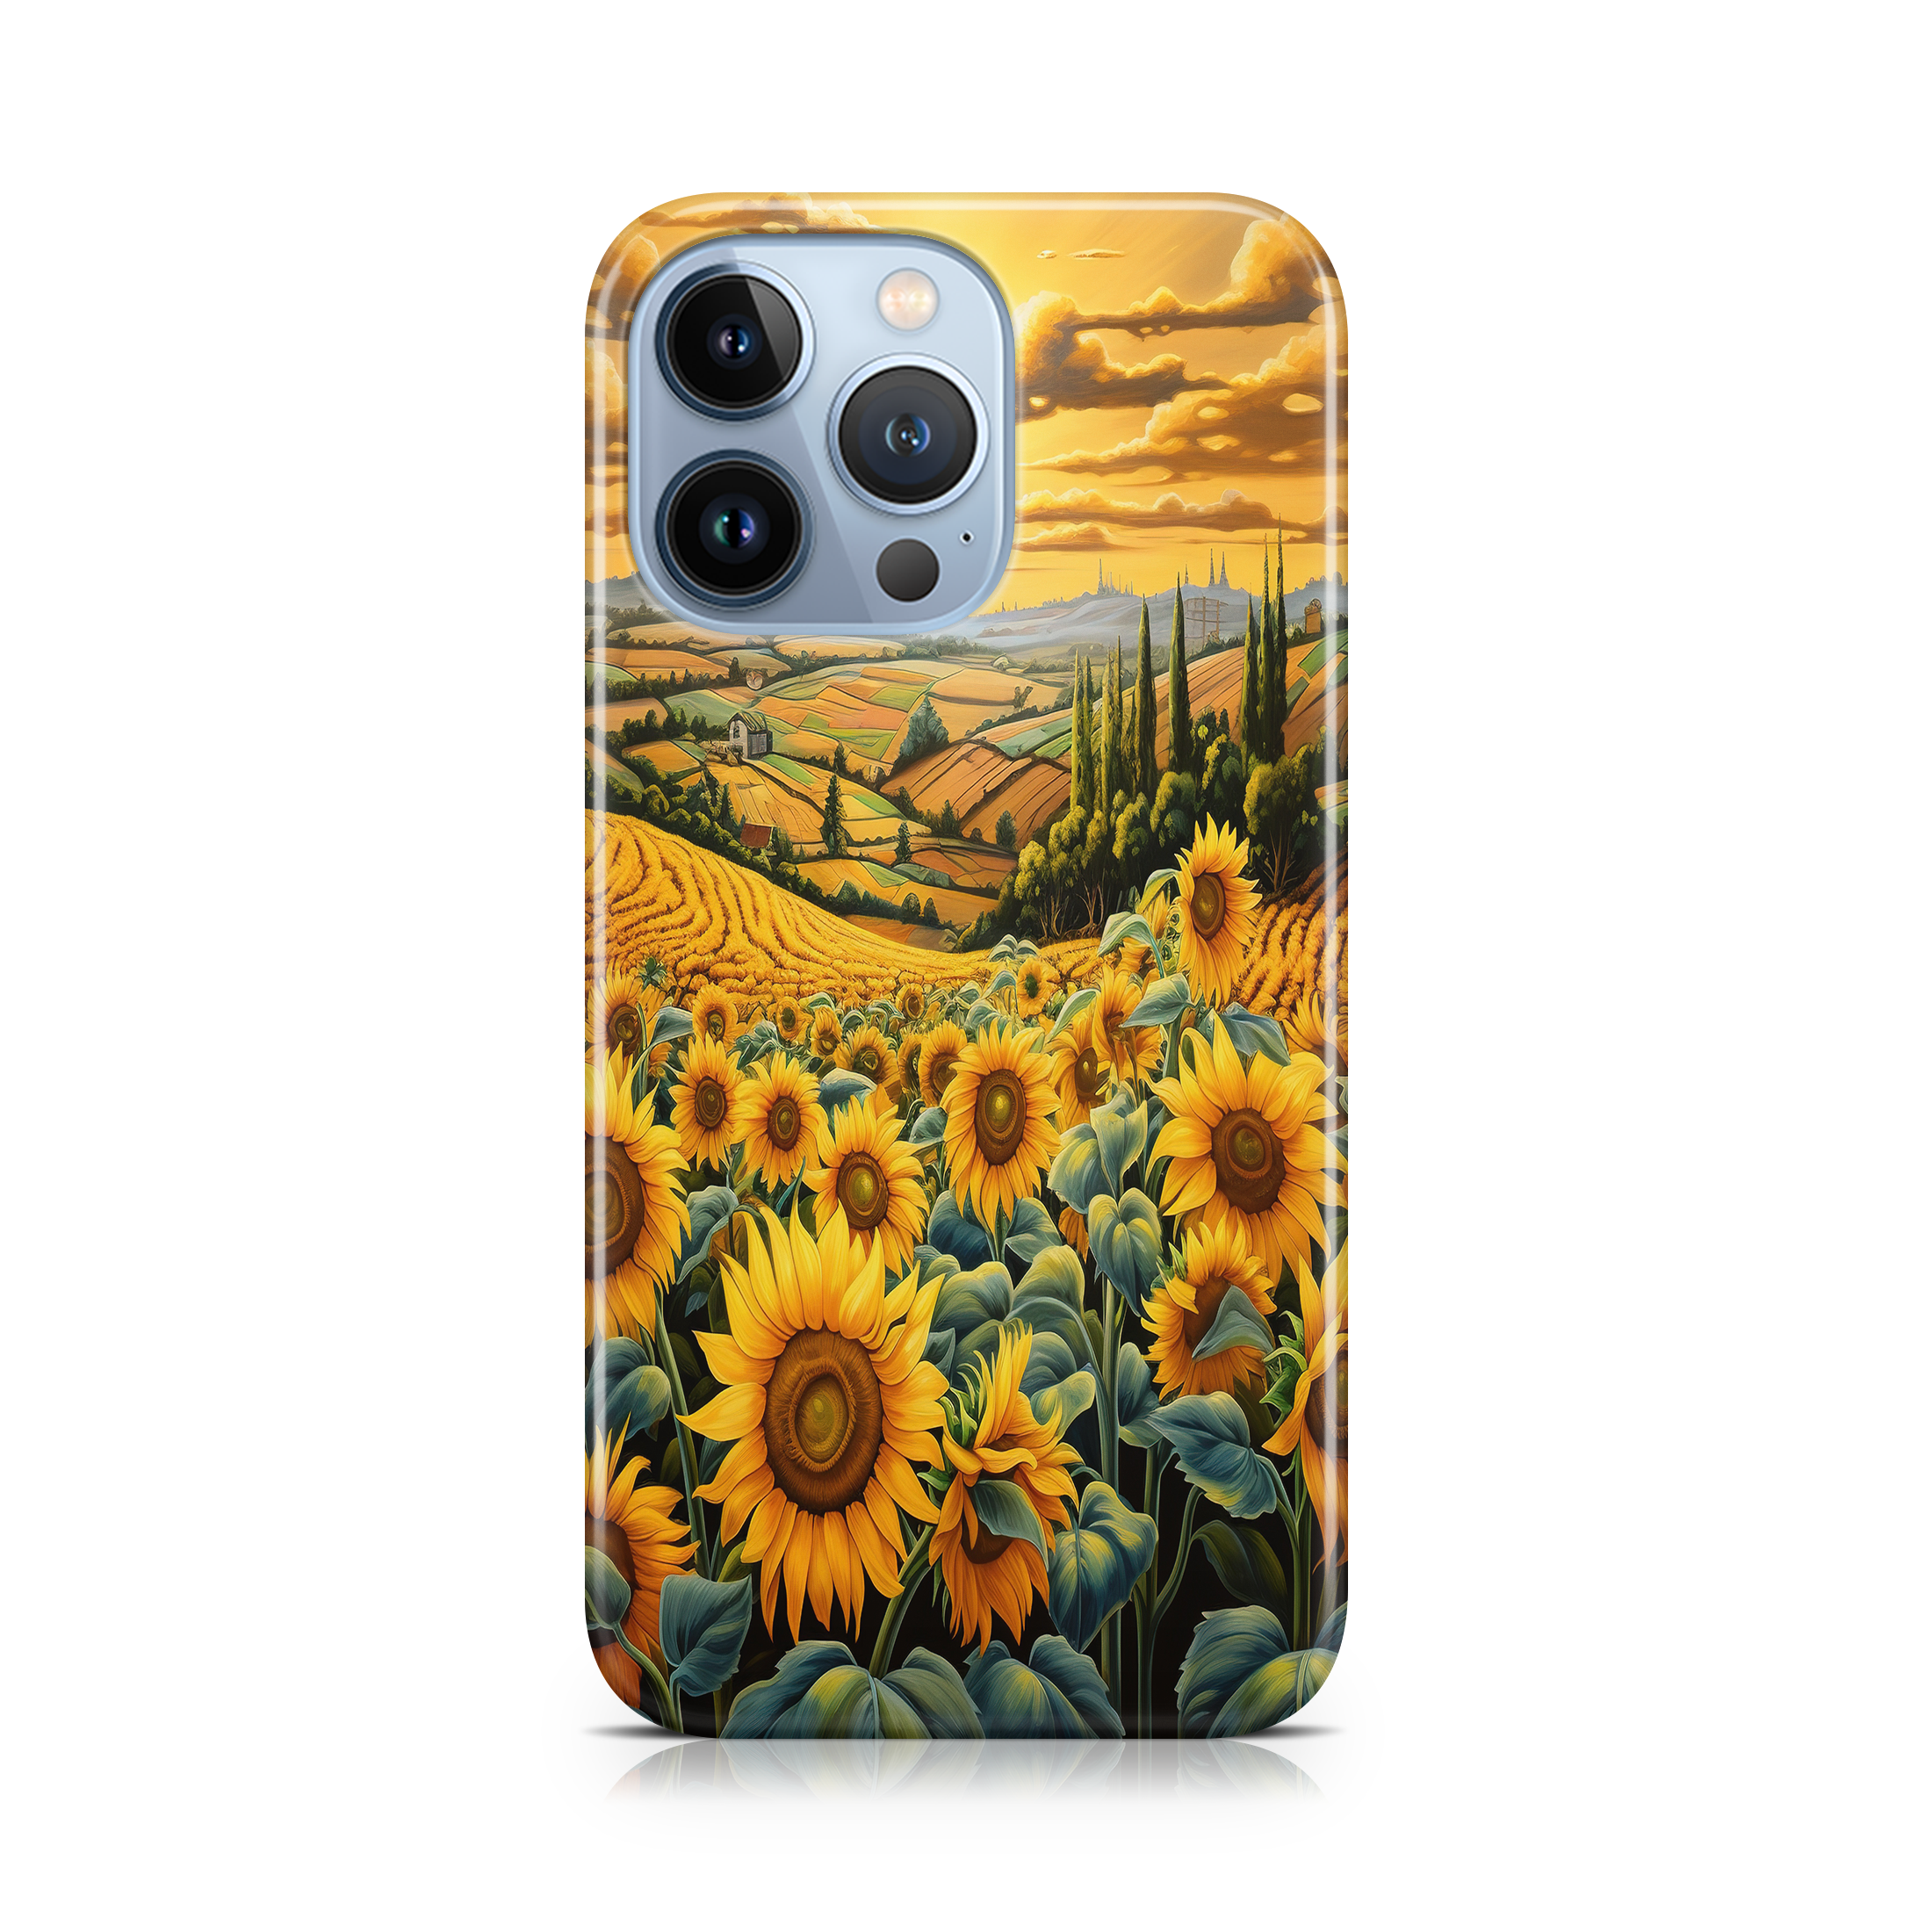 Sunflower Fields - iPhone phone case designs by CaseSwagger